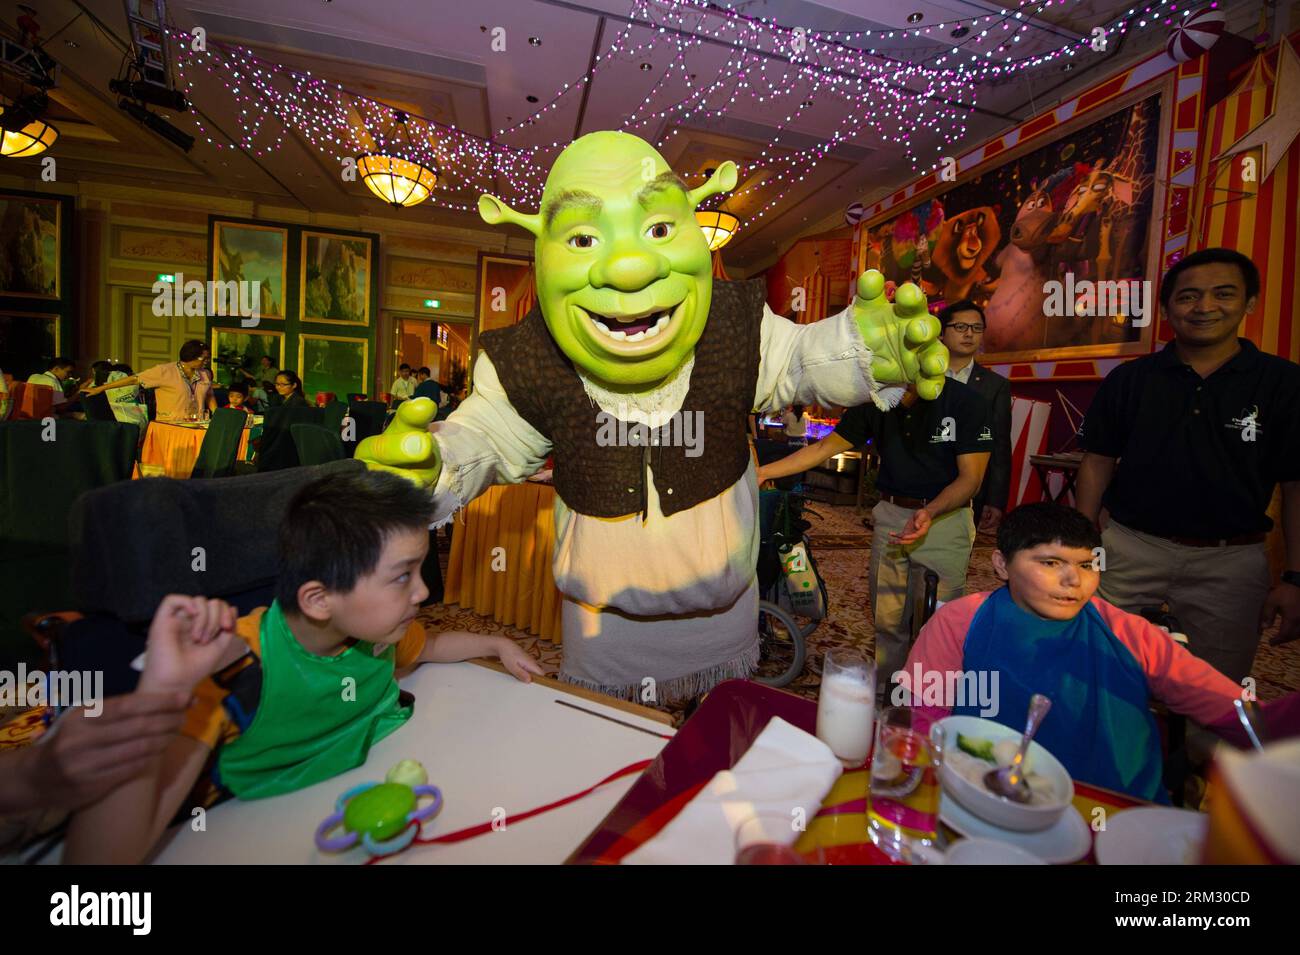 Bildnummer: 59922668  Datum: 30.06.2013  Copyright: imago/Xinhua (130630) -- MACAO, June 30, 2013 (Xinhua) -- Children interact with a staff member dressed as cartoon character Shrek during an activity in south China s Macao, June 30, 2013. The launch ceremony of a Dreamworks experiencing resort in Cotai Strip was held here Sunday. From July 1, 2013, can enjoy themselves with characters from movies produced by Dreamworks, a world s leading film studio, at Cotai Strip. (Xinhua/Cheong Kam Ka)(wjq) CHINA-MACAO-DREAMWORKS-ACTIVITY (CN) PUBLICATIONxNOTxINxCHN Entertainment Comicfiguren x2x xst 2013 Stock Photo